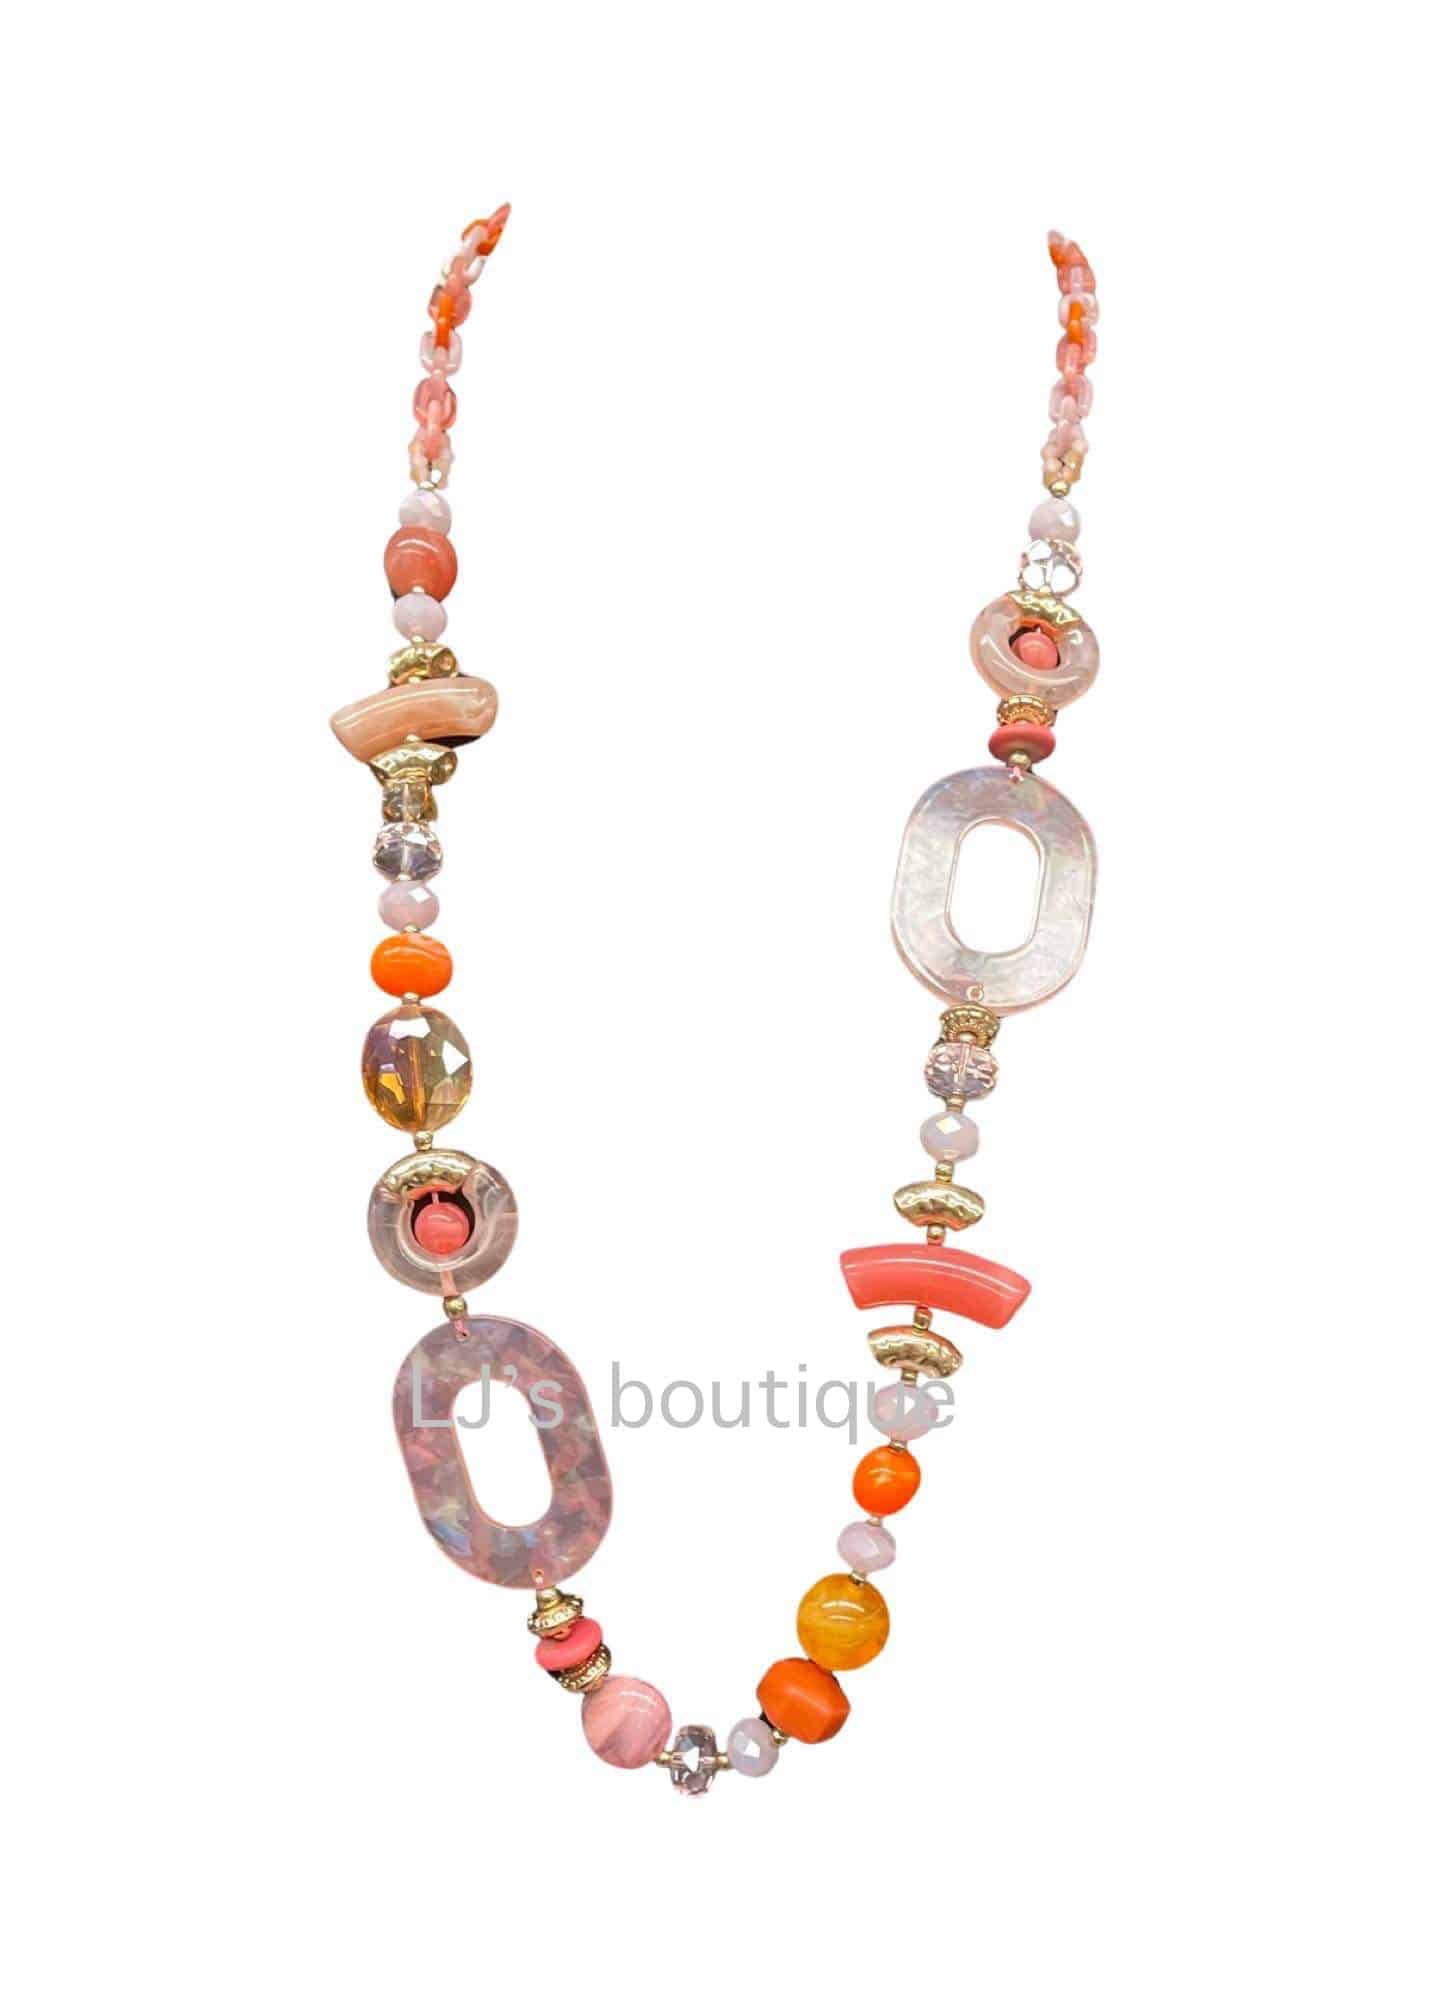 897 PASTEL CORAL AND GOLD TRIM NECKLACE